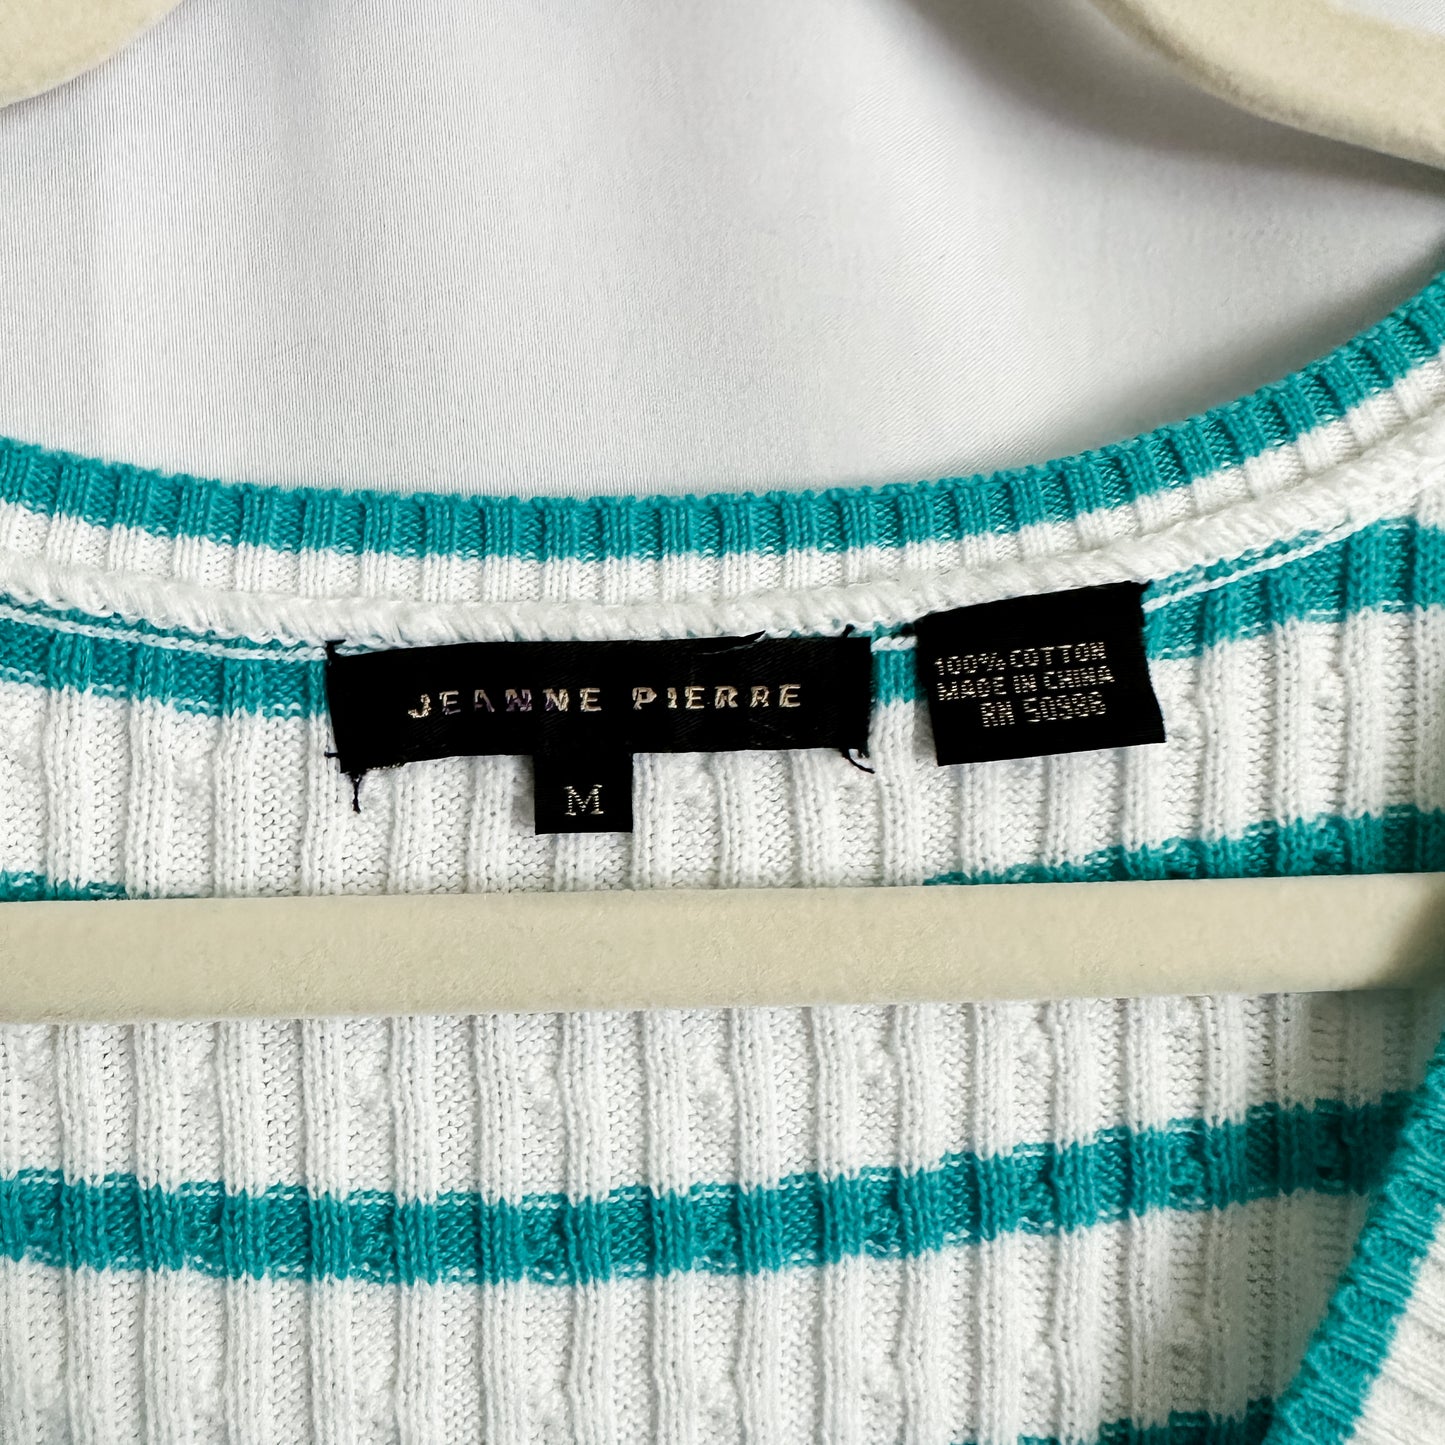 White and Teal Striped Cableknit Sweater Vest (fits S-M)